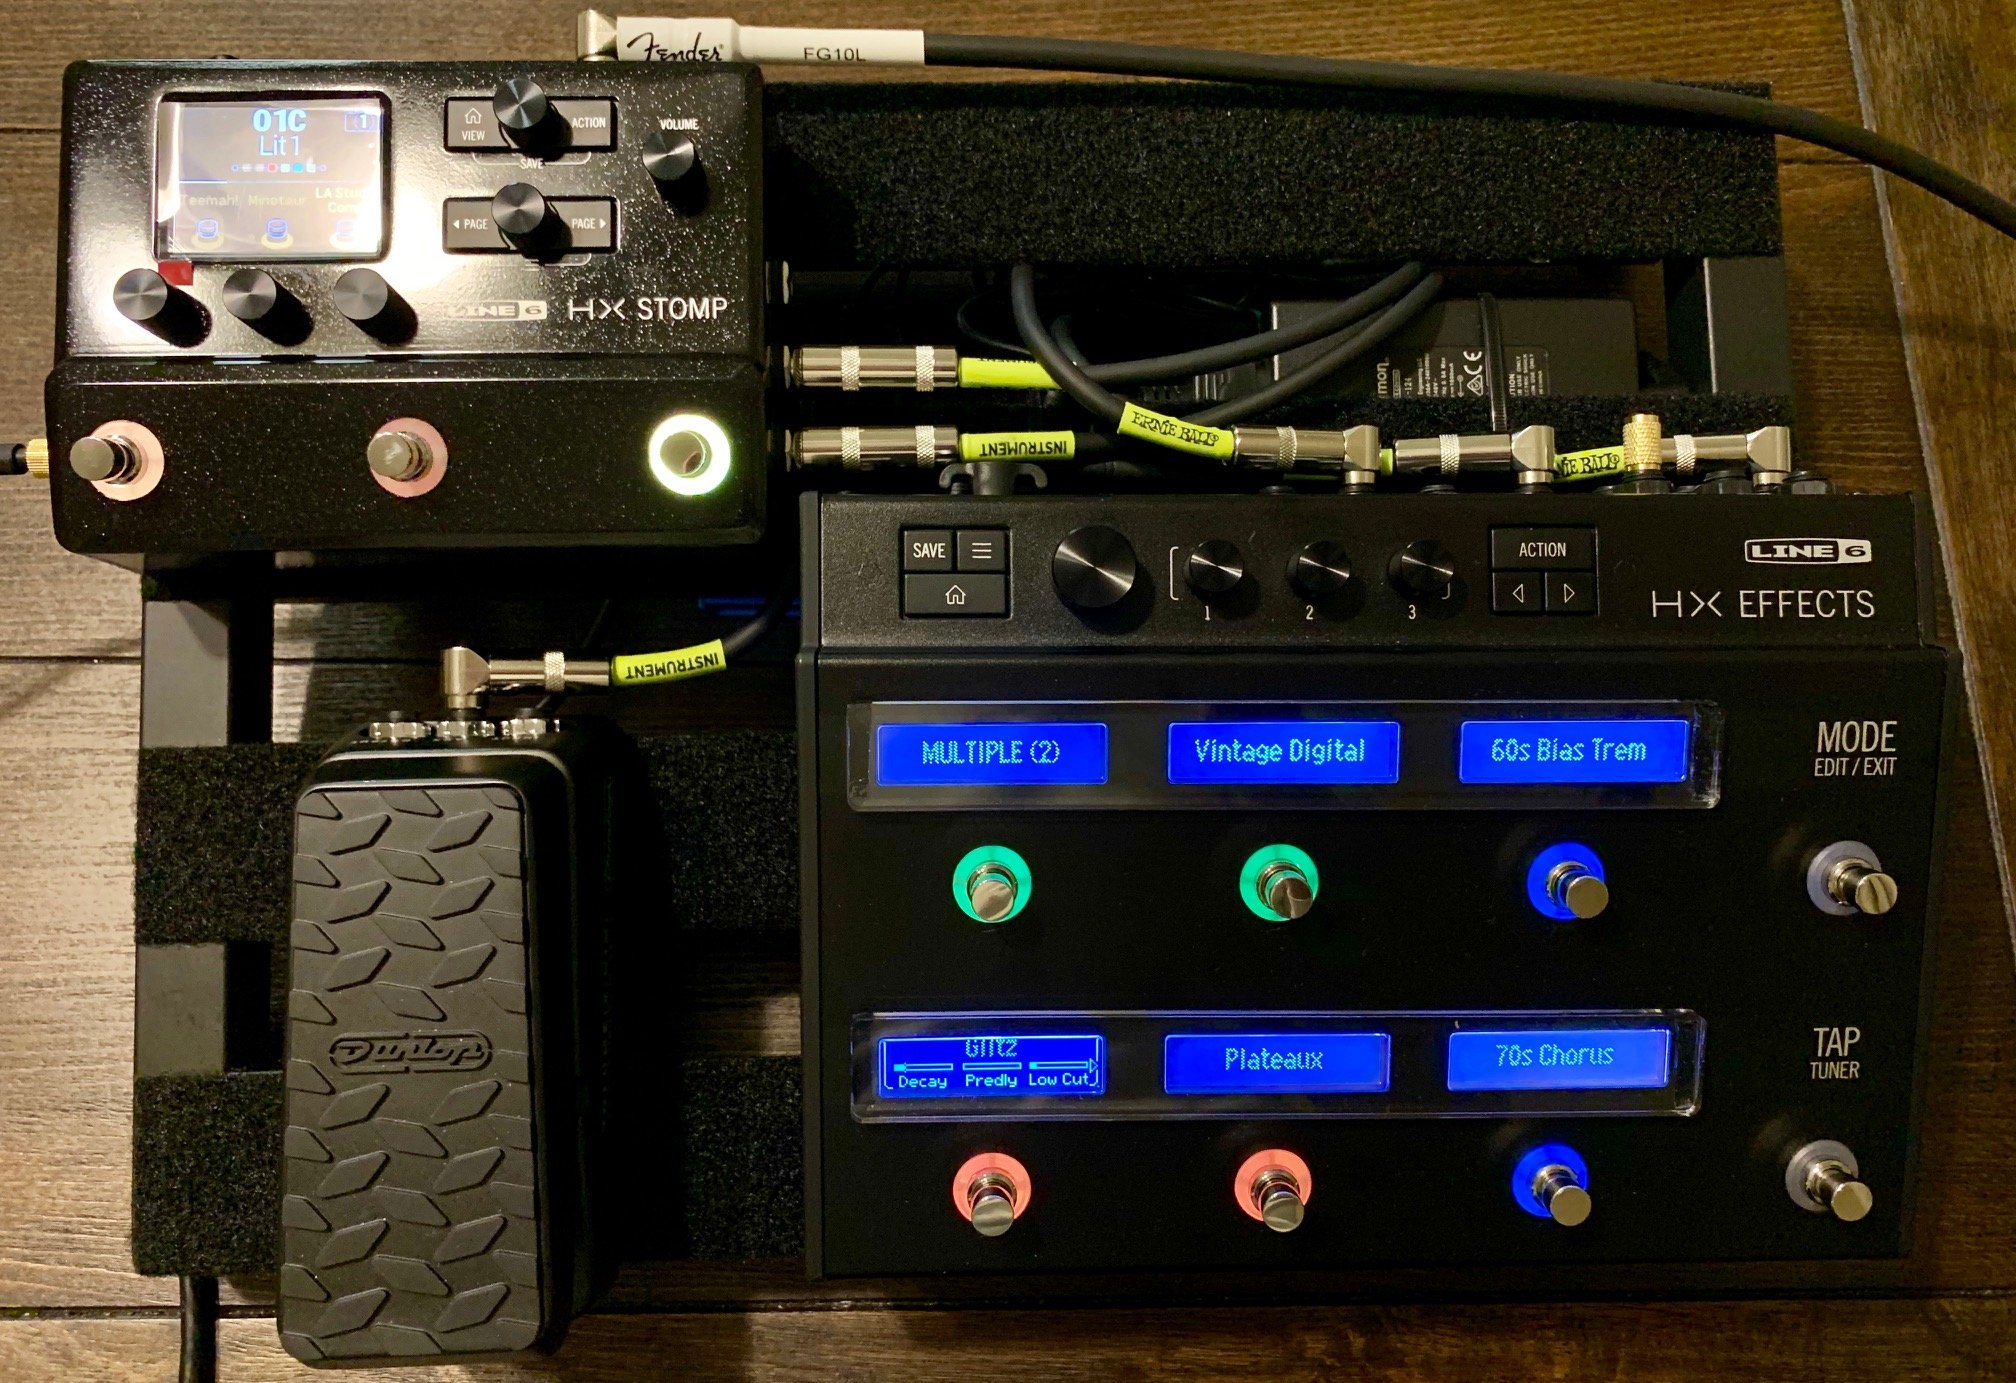 Powering both HX Stomp and HX Effects with 1 Power Supply - Helix 